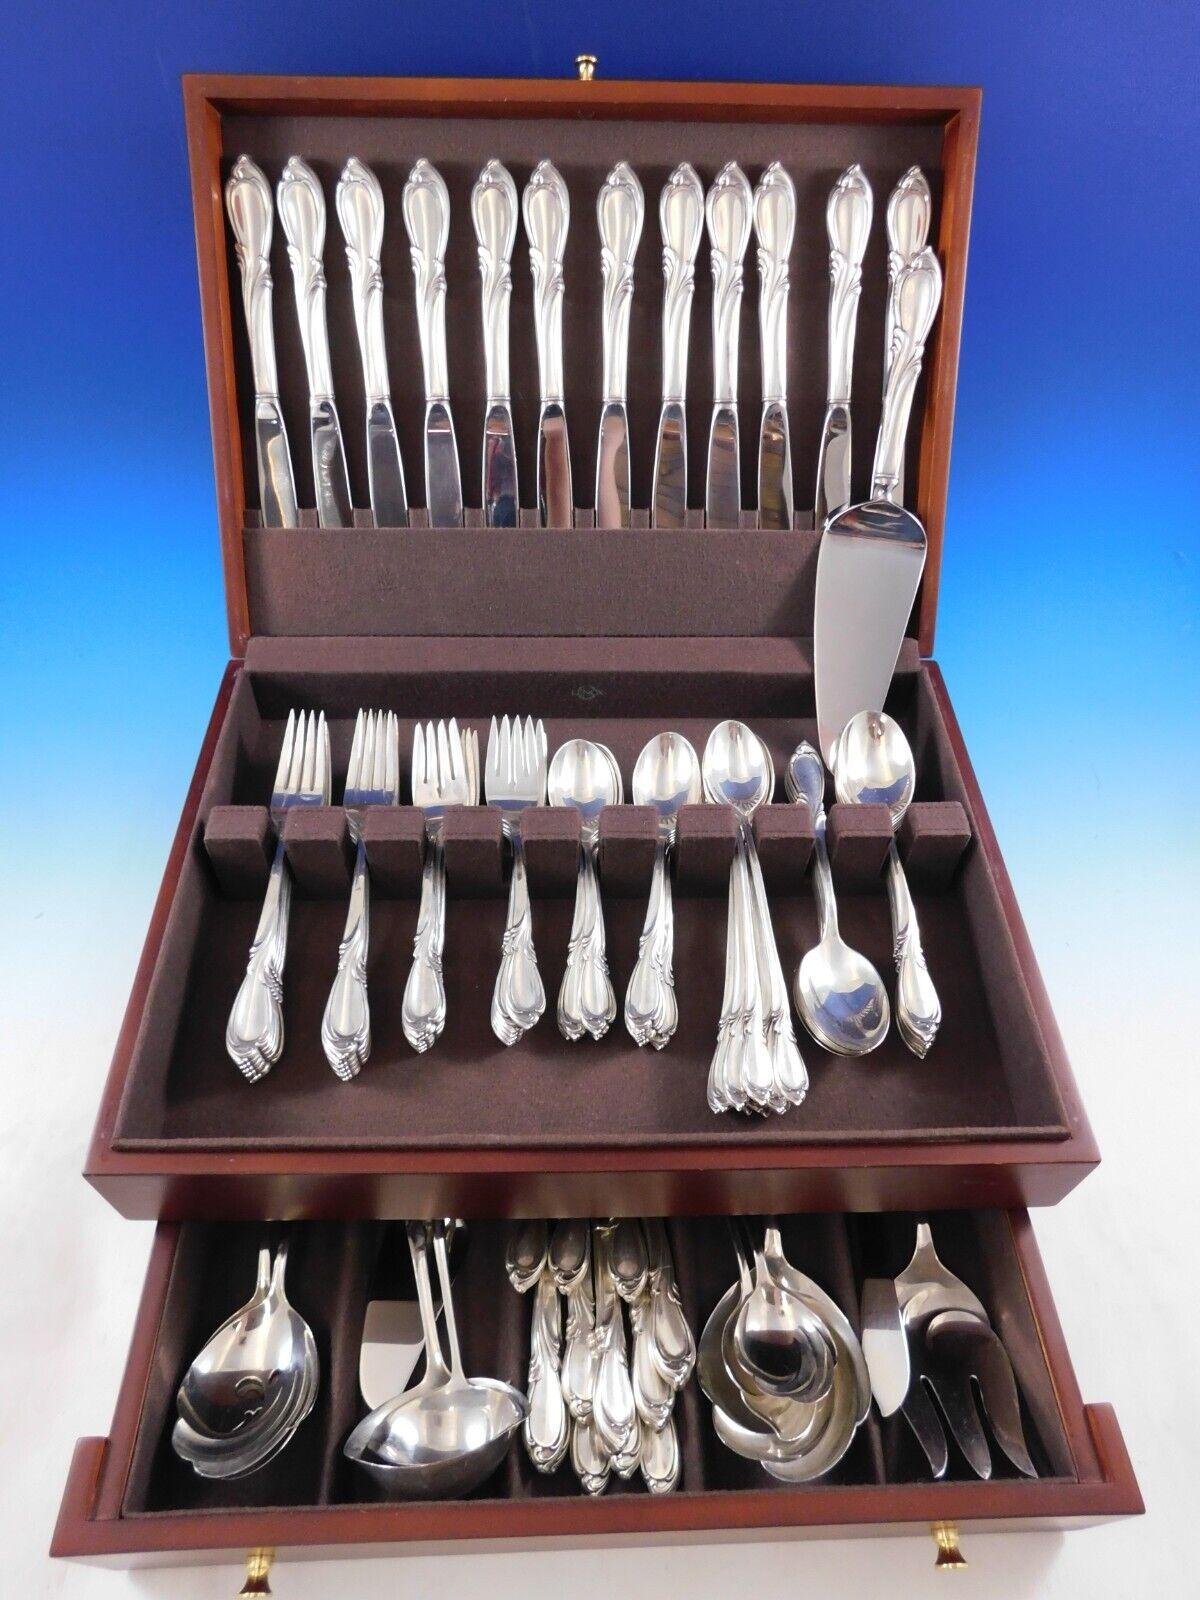 Rhapsody by International sterling silver Flatware set - 95 pieces. This set includes:
12 Knives, 9 1/4
12 Forks, 7 1/4